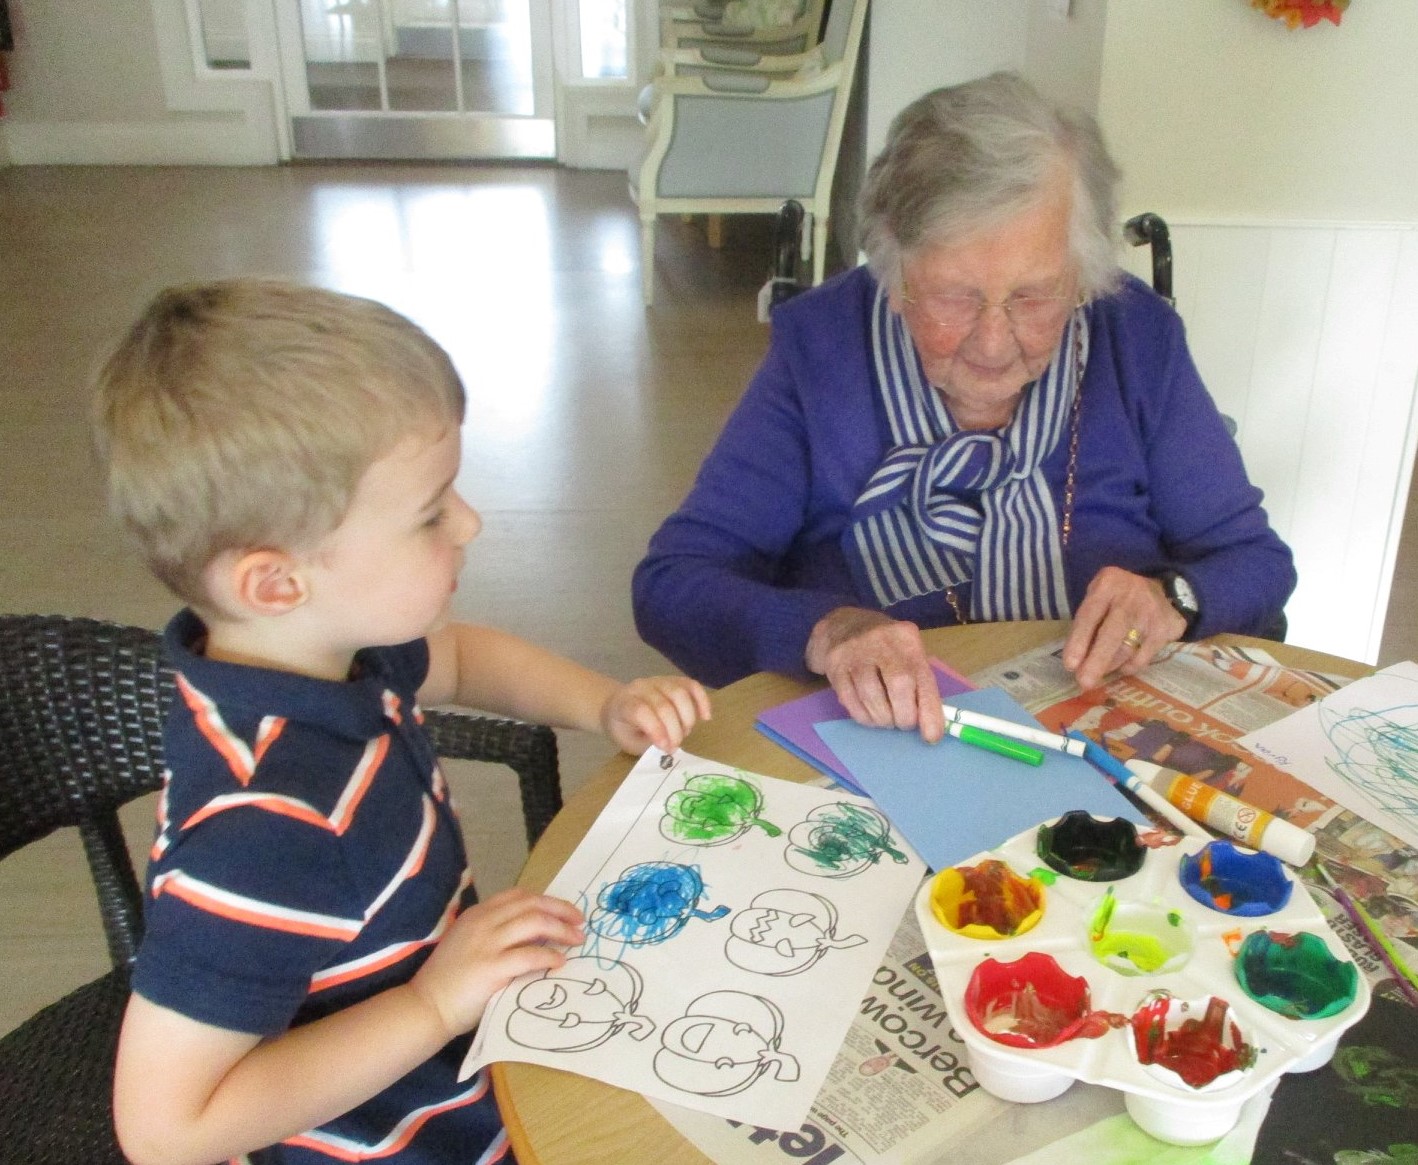 toddler and older person at MHA Belvedere Manor care home making cards and painting